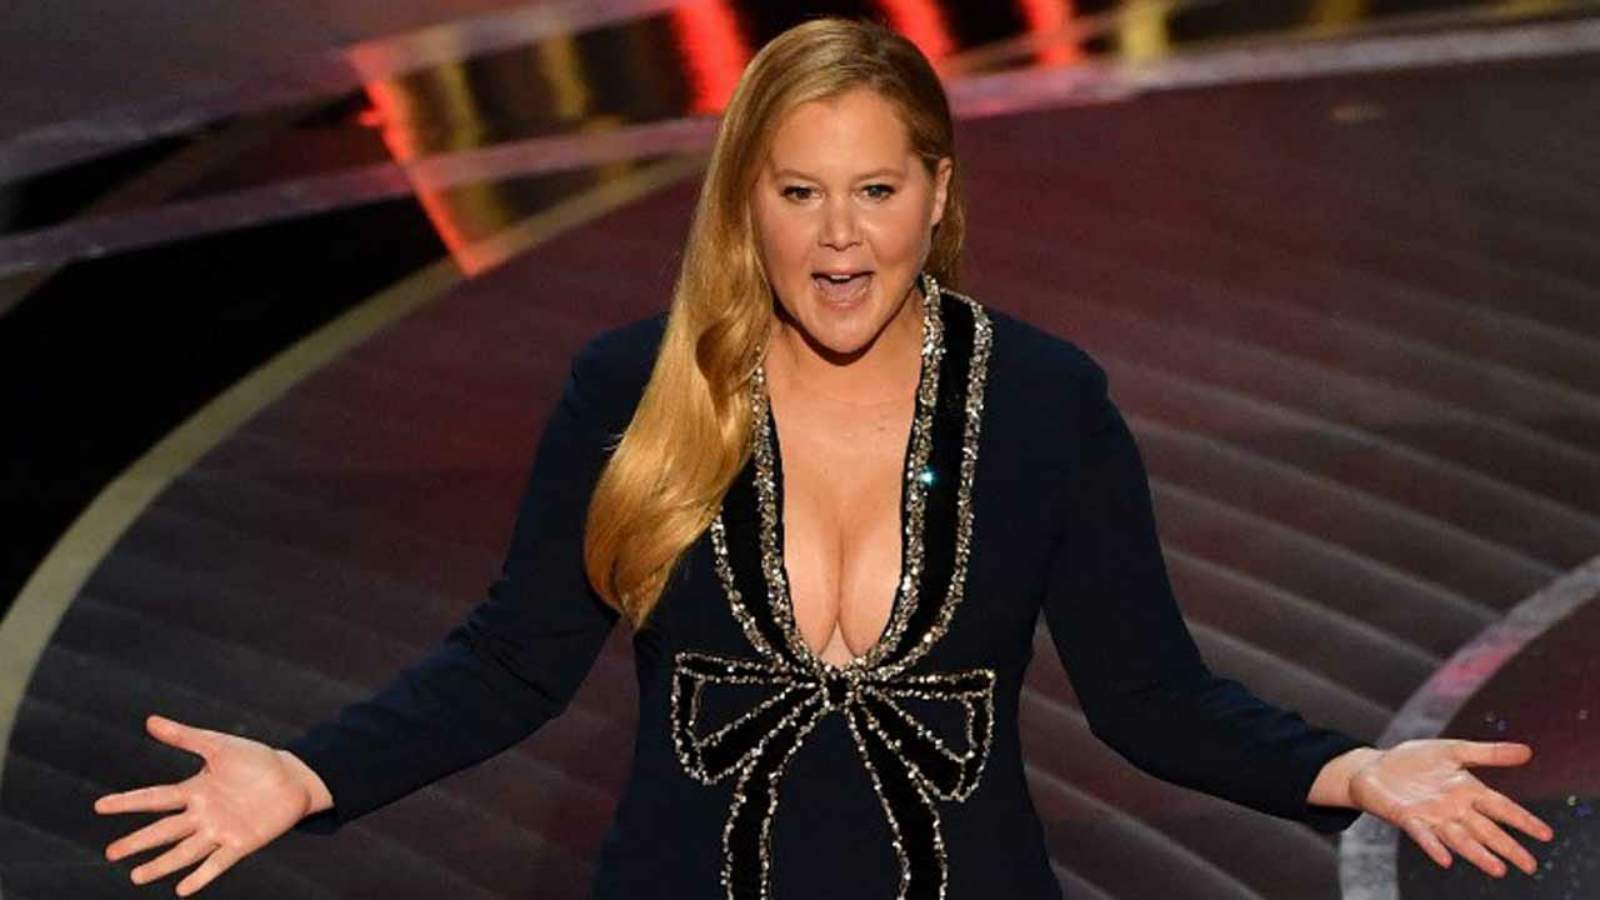 Amy Schumer At The 94th Academy Awards